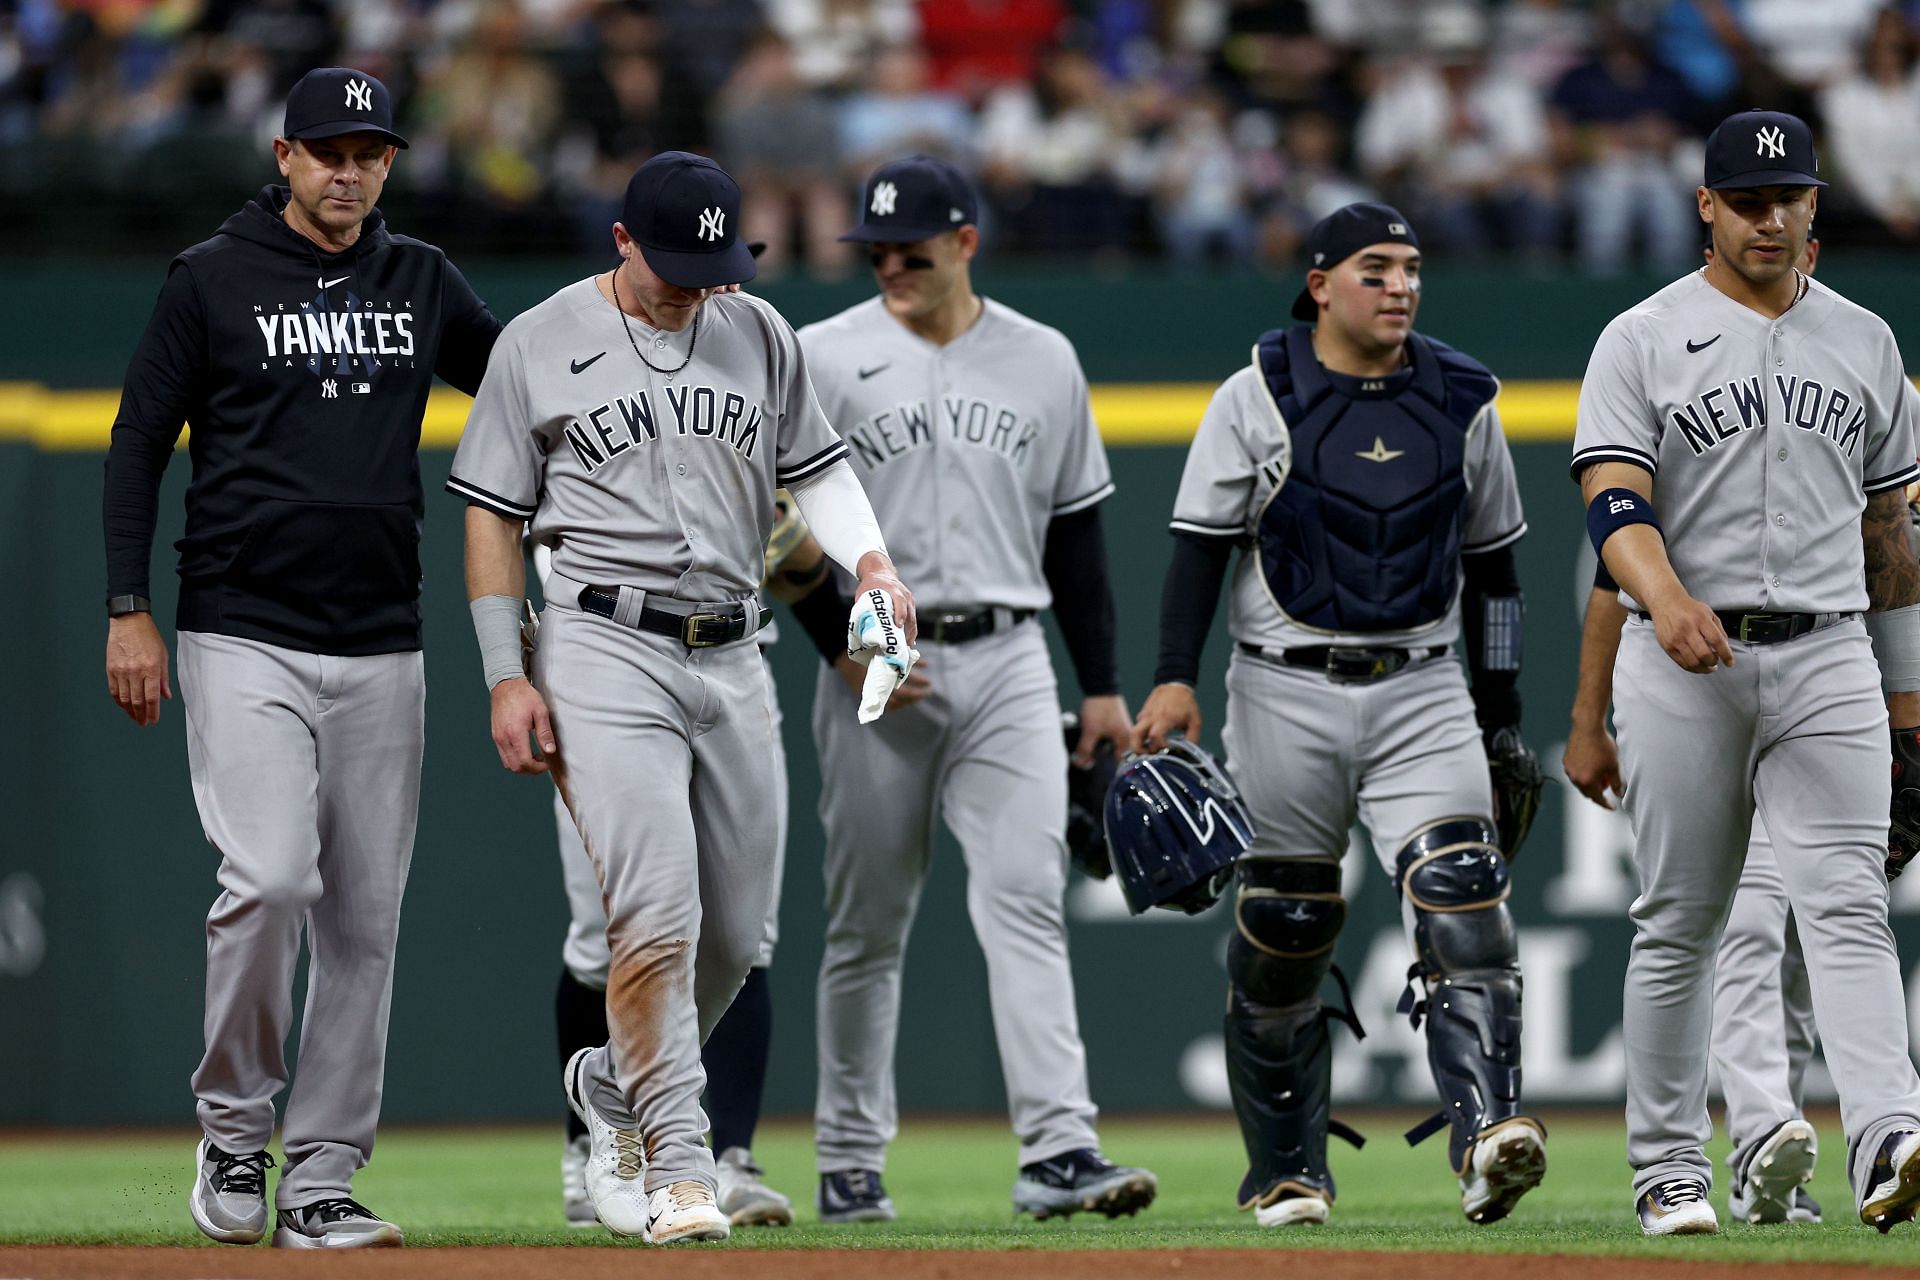 New York Yankees fans upset with team's offense after shutout loss against  the Texas Rangers: Tough to watch No offense again? I'm shocked!